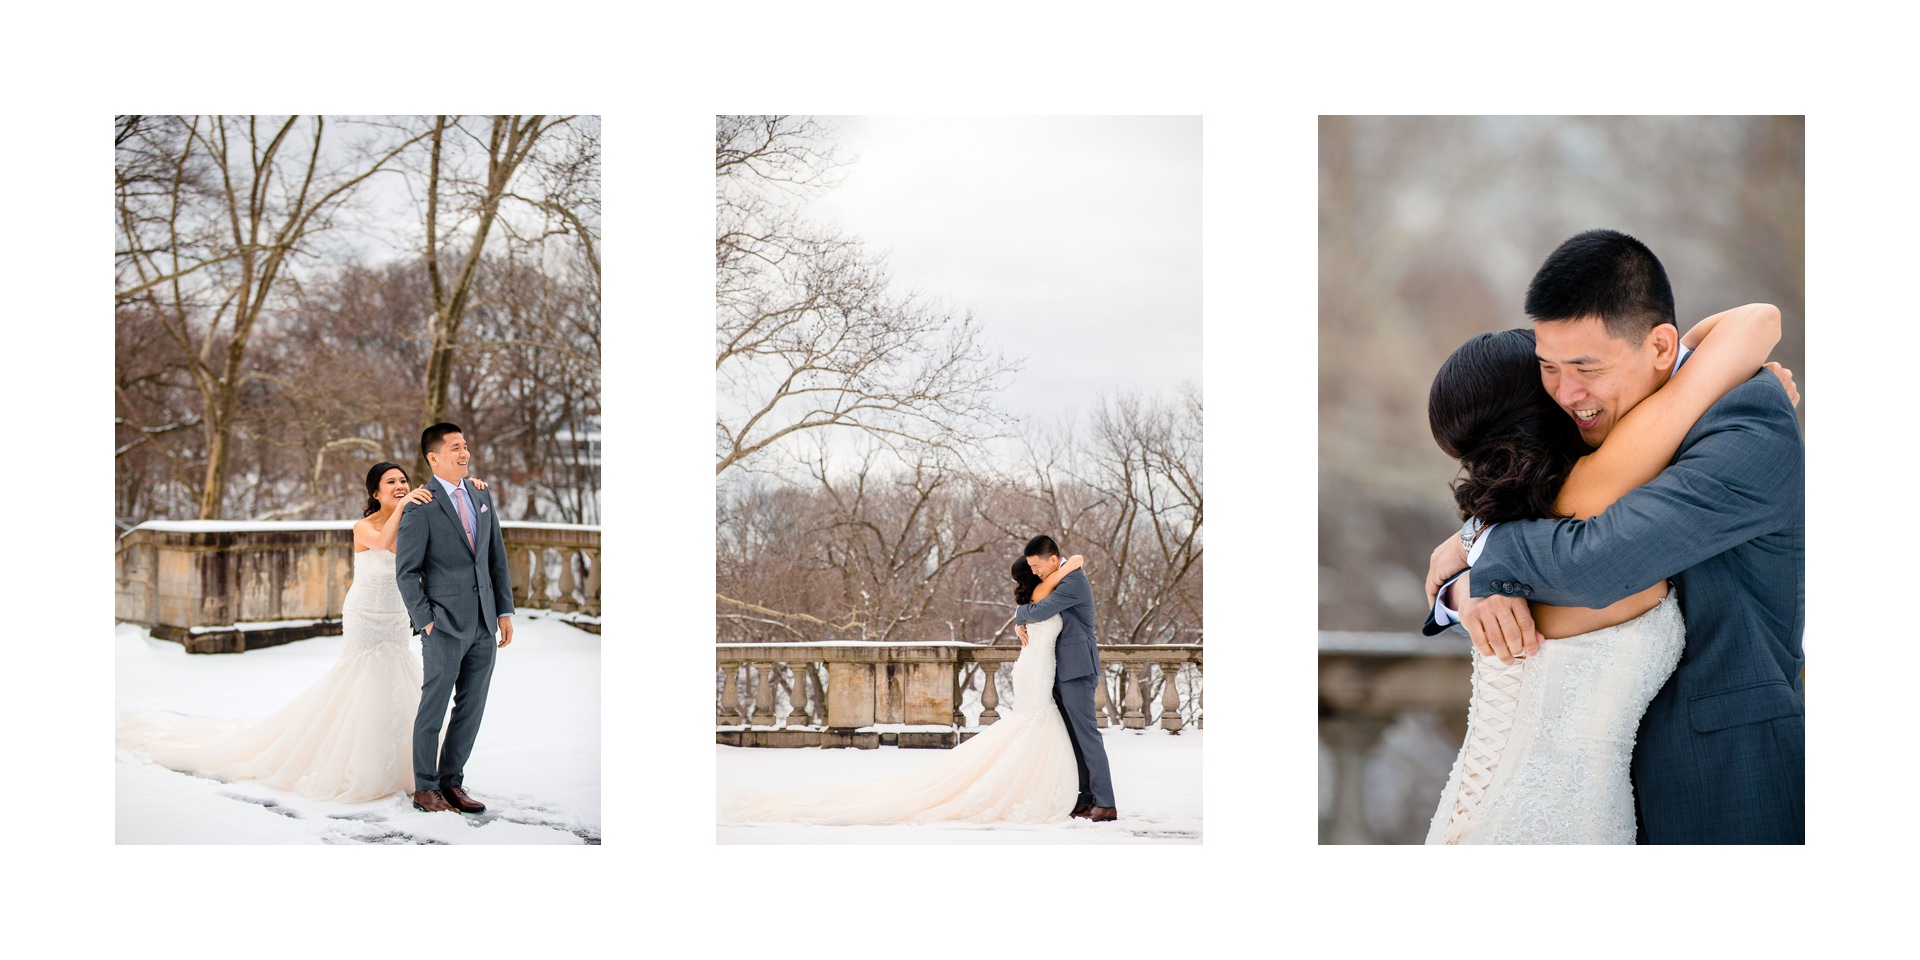 Windows on the River Winter Wedding Photographer in Cleveland 37.jpg